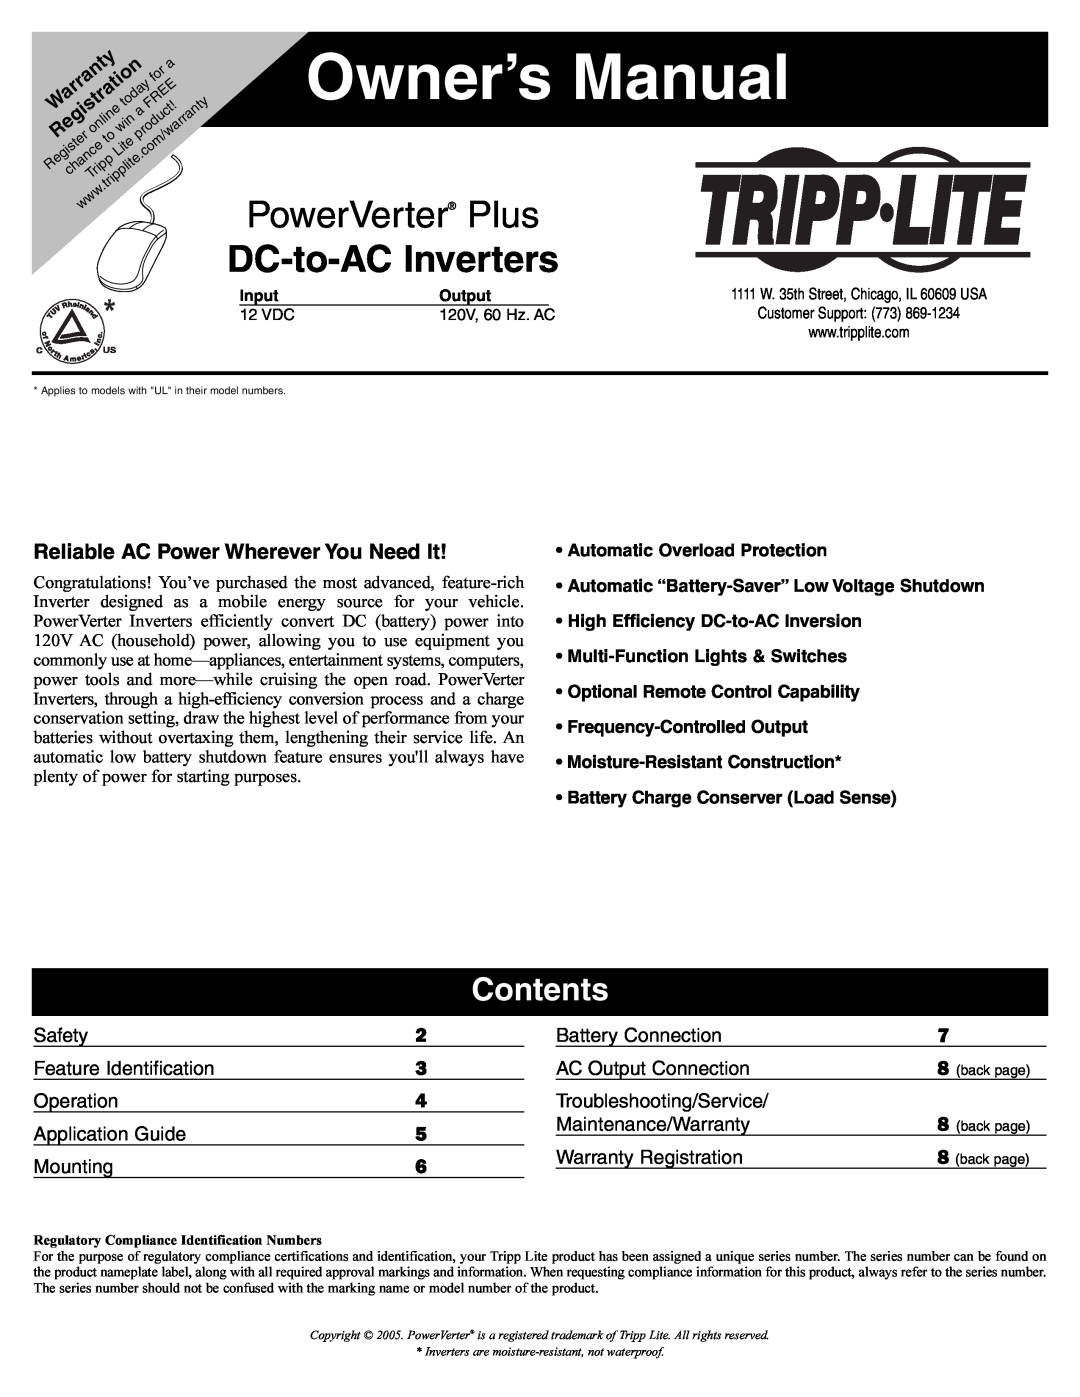 Tripp Lite DC-to-AC Inverter owner manual Contents, Reliable AC Power Wherever You Need It, PowerVerter Plus 